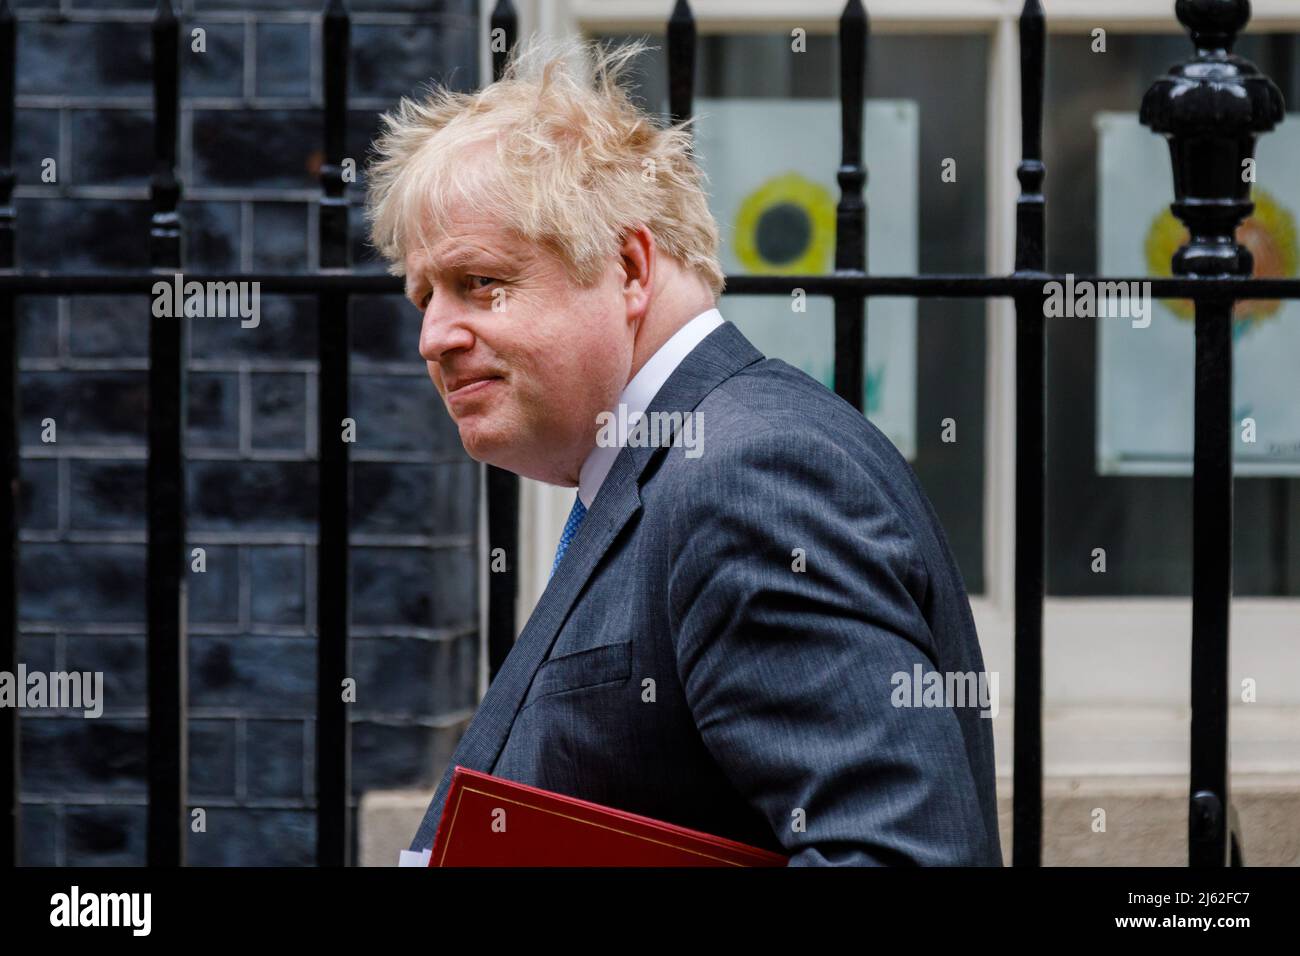 Downing Street, London, UK. 27th April 2022.British Prime Minister, Boris Johnson, departs from Number 10 Downing Street to attend weekly Prime Minister's Questions (PMQ) session in the House of Commons. Amanda Rose/Alamy Live News Stock Photo